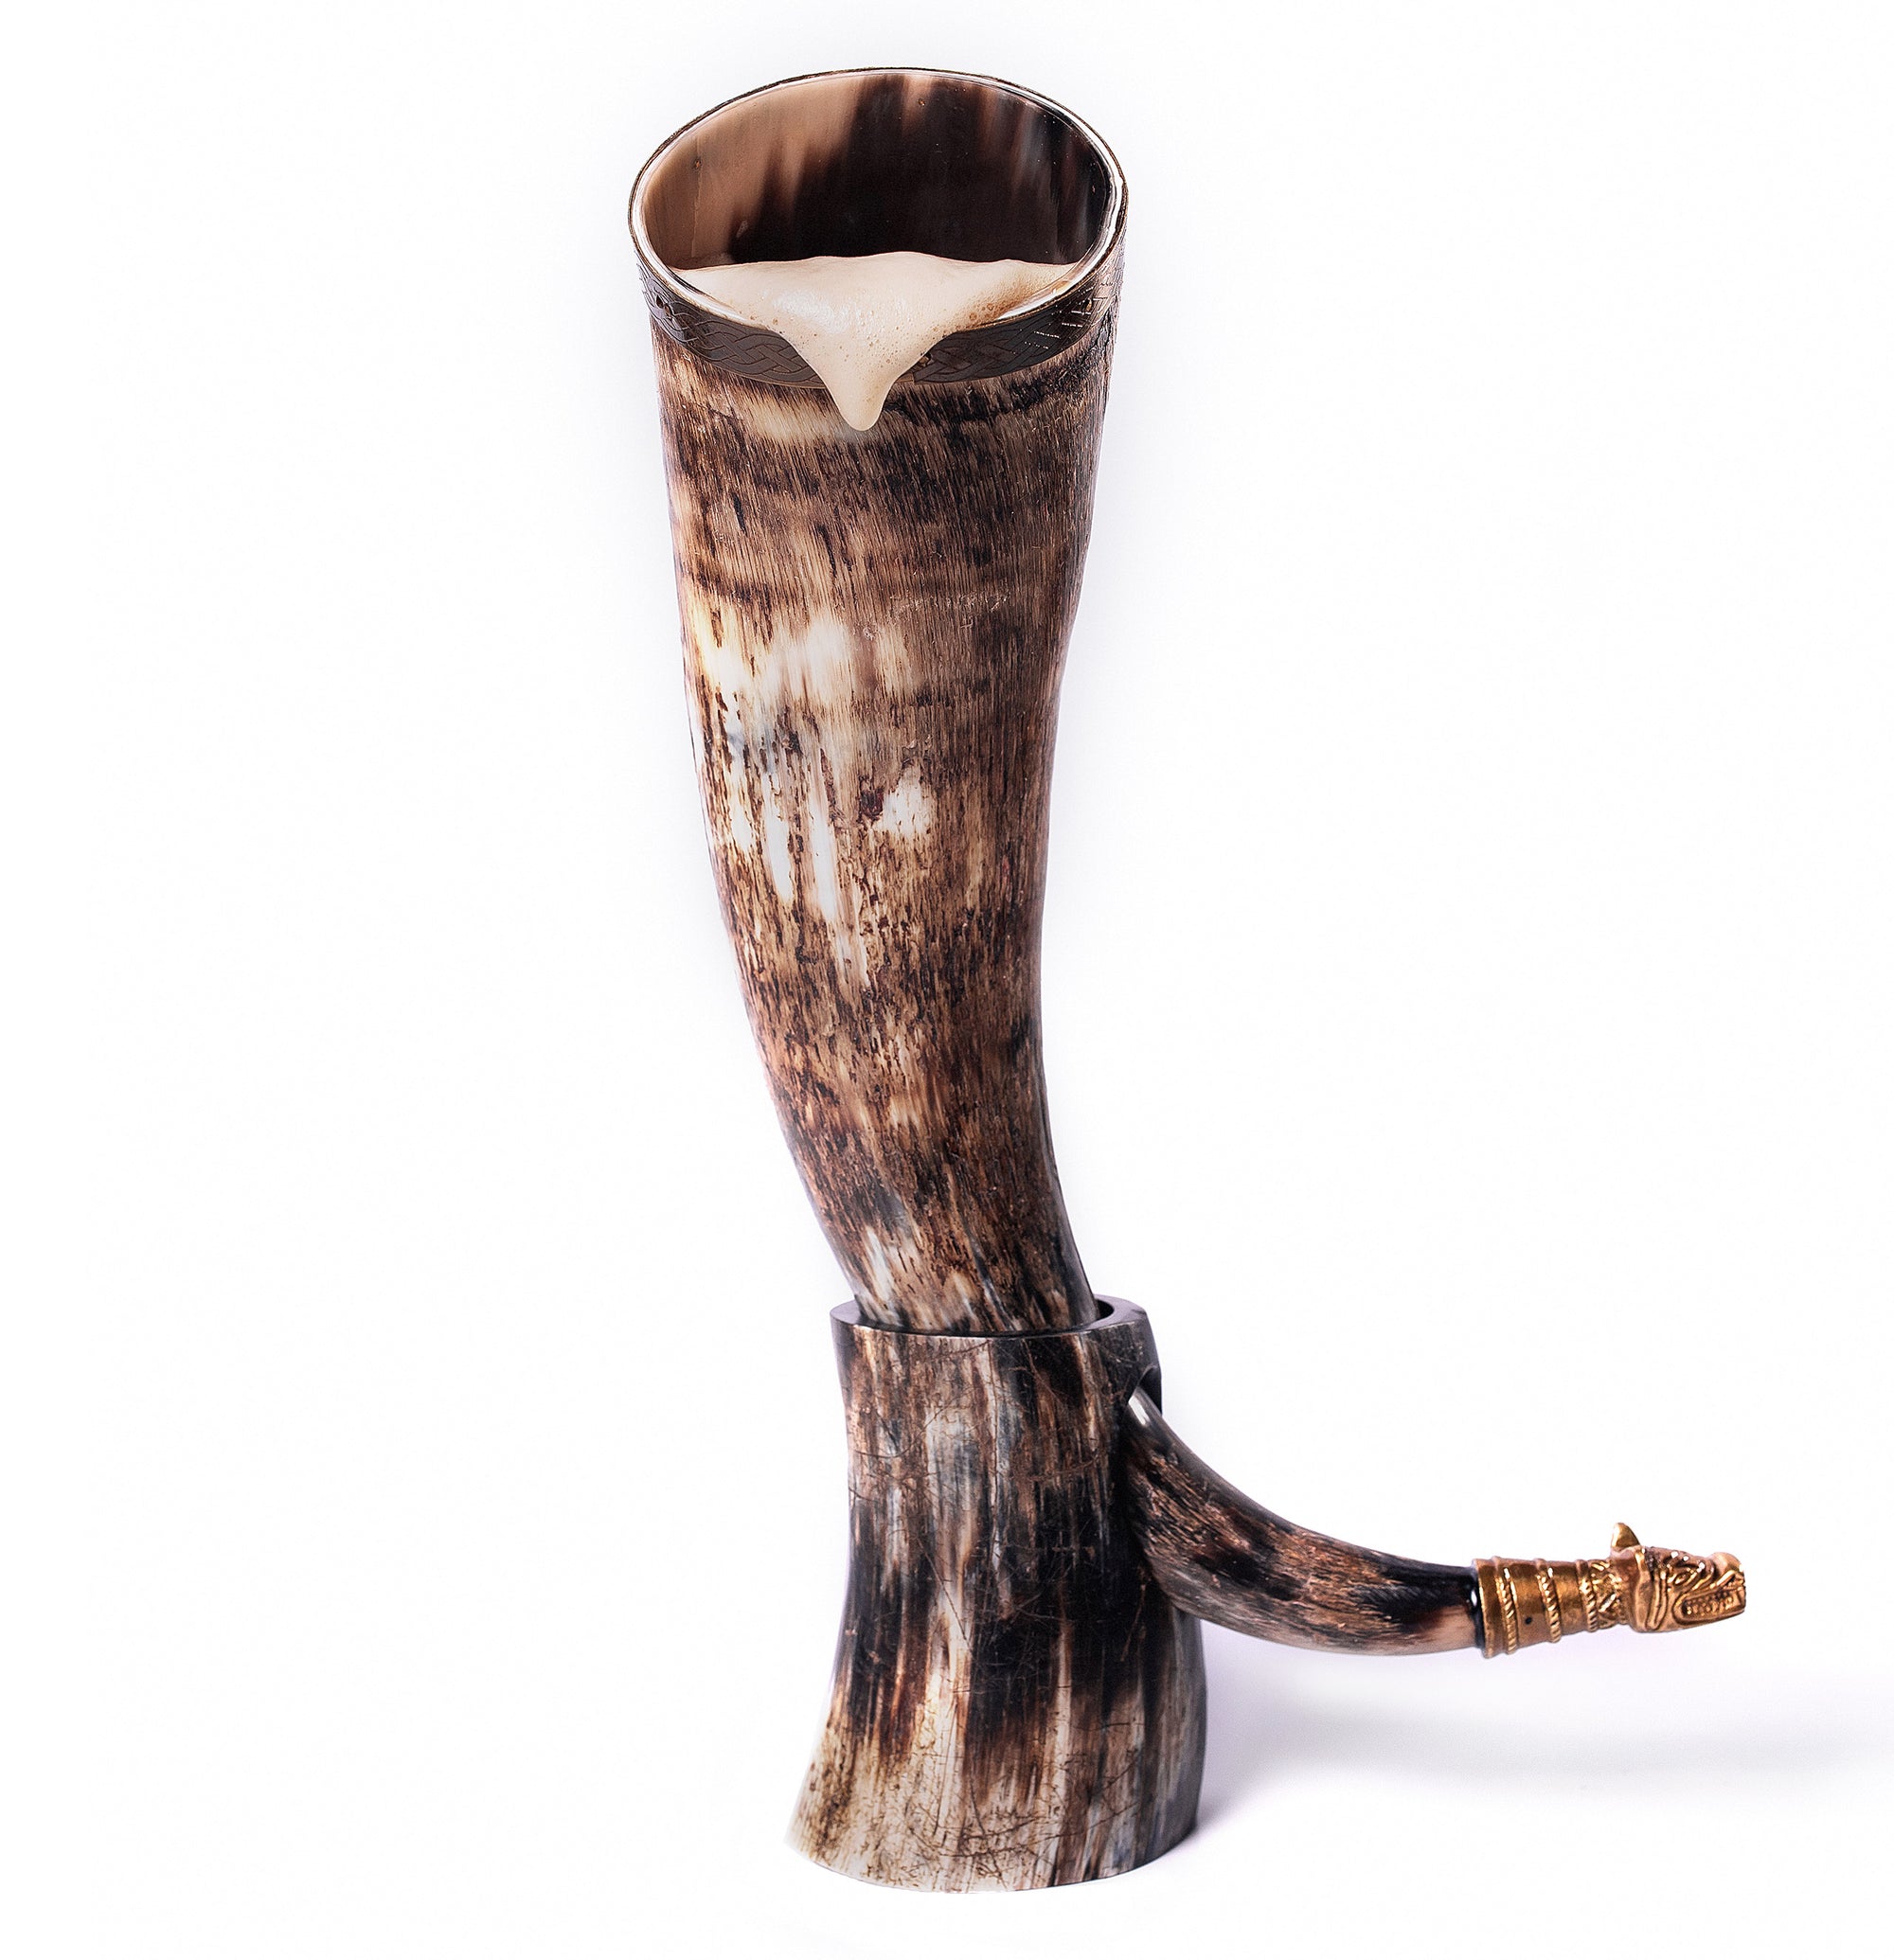 Curved Drinking Horns